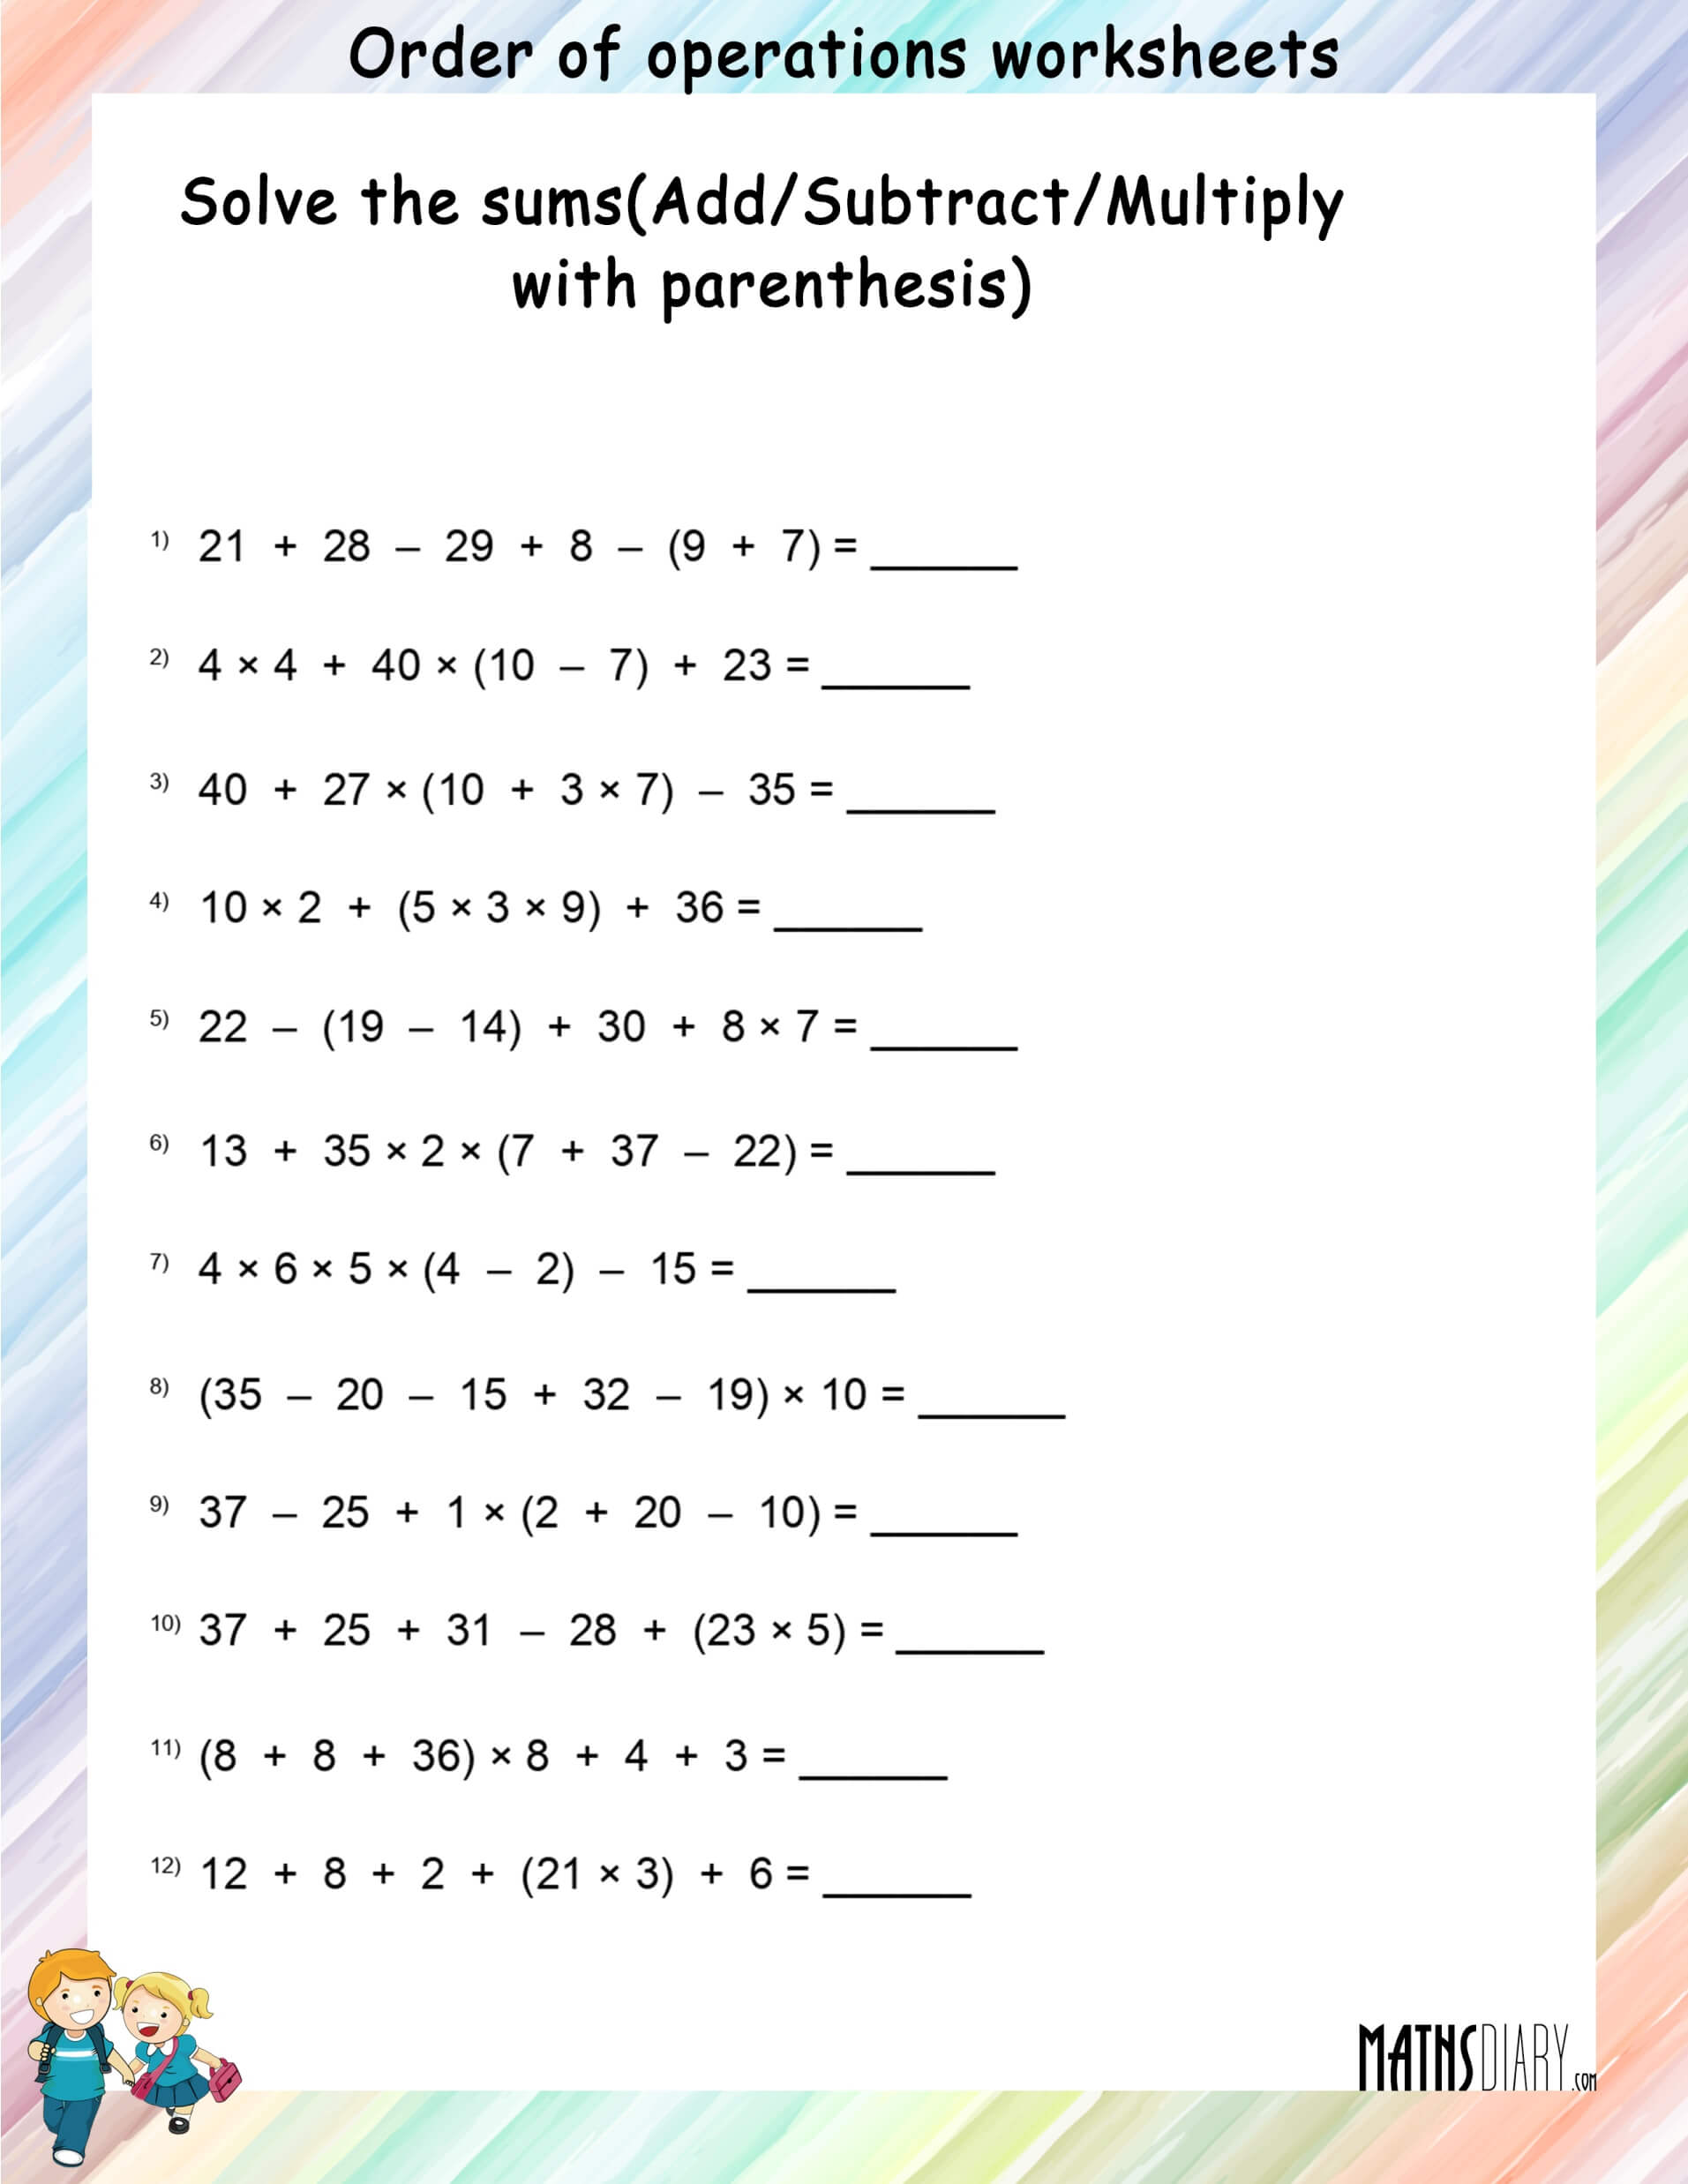 grade-3-order-of-operations-worksheets-free-and-printable-k5-learning-integers9-mixed